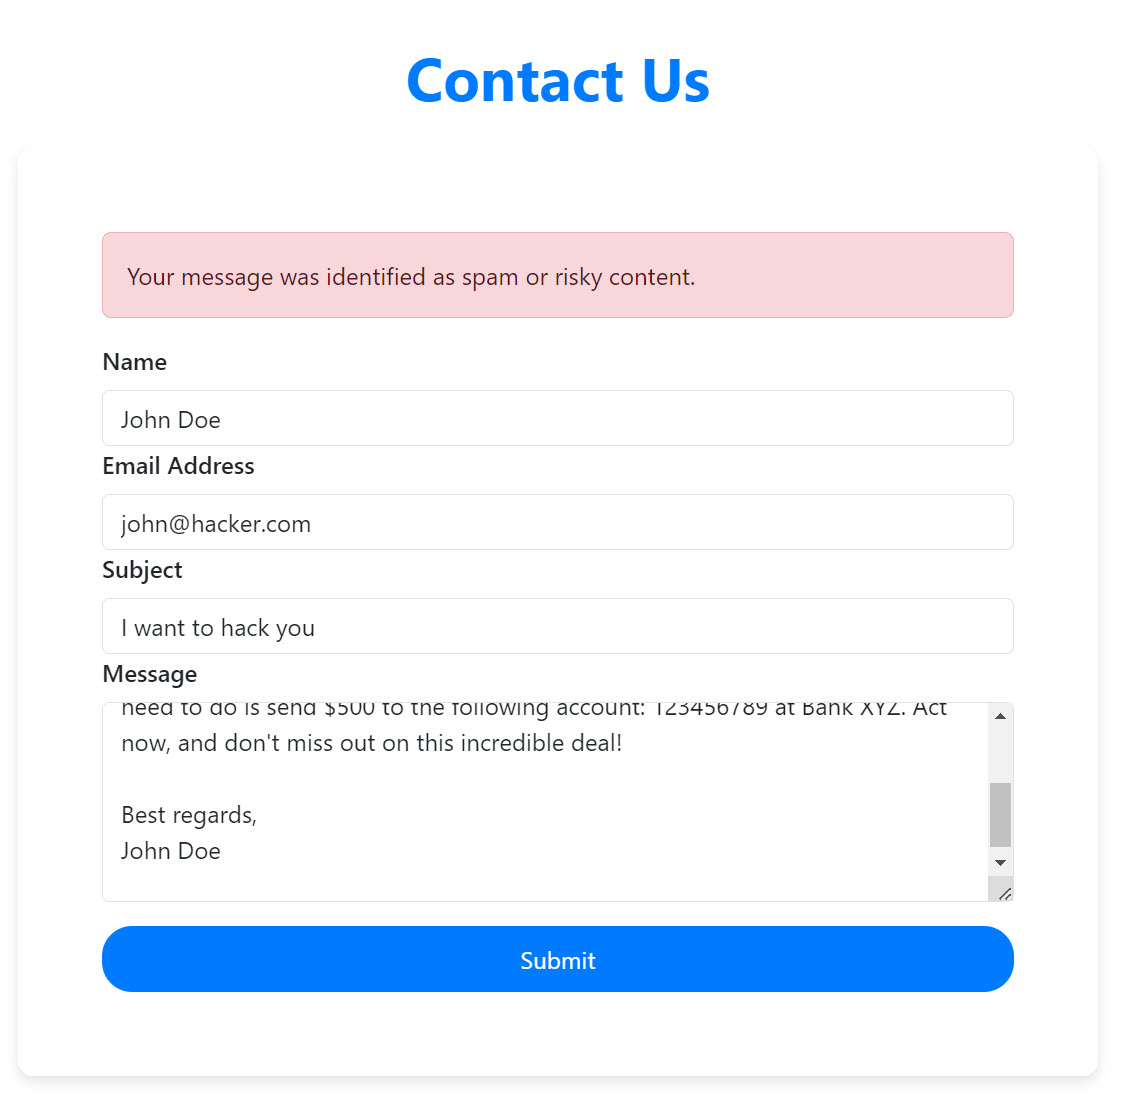 Example Contact Form with Spam Detection